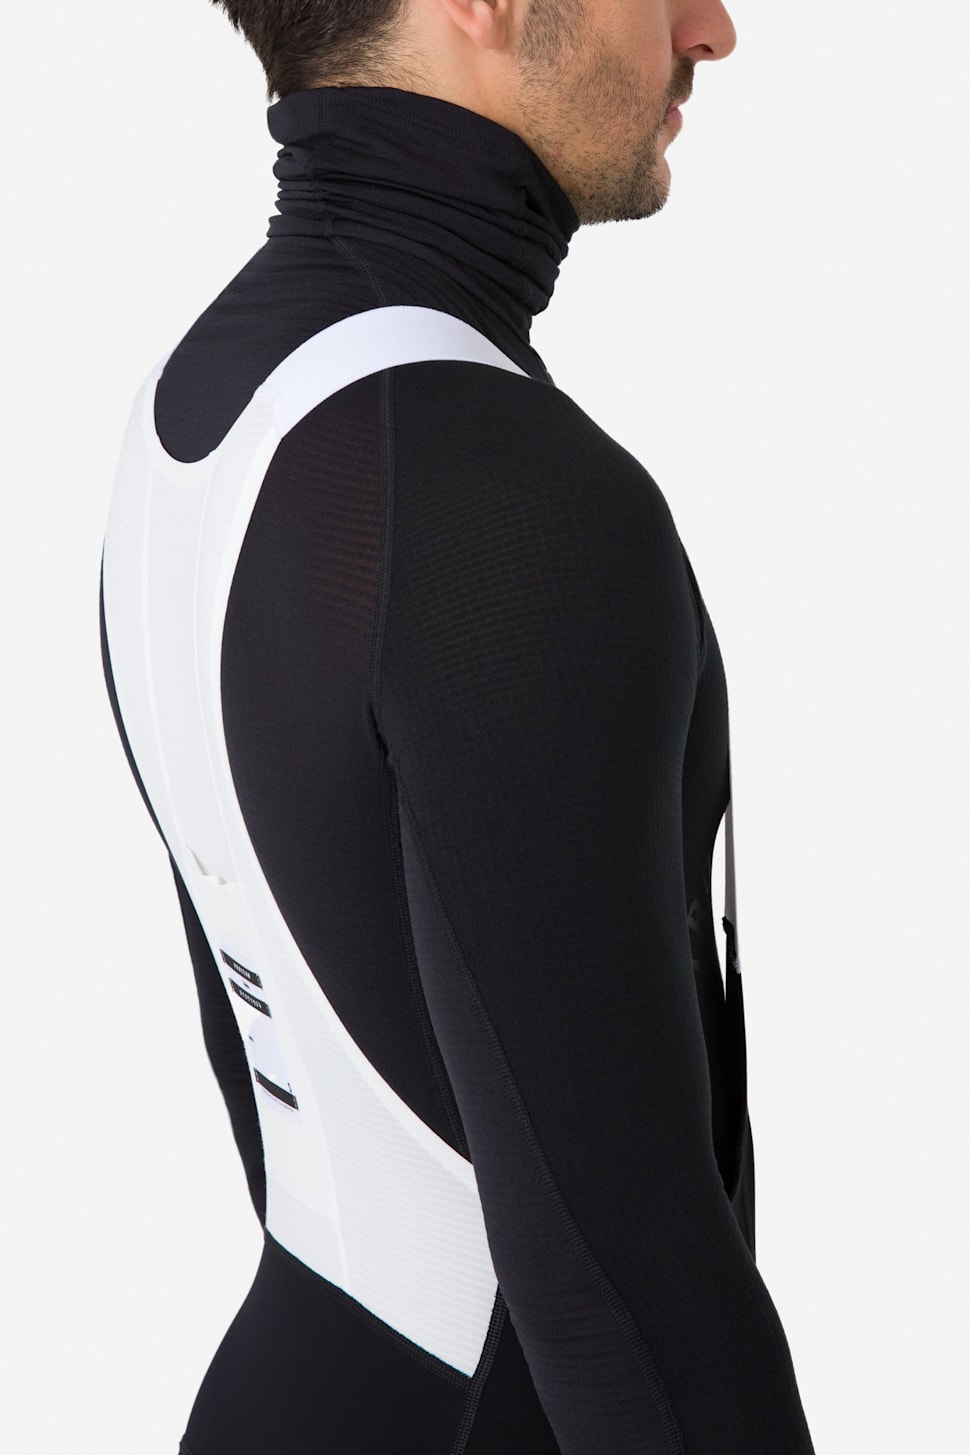 Men's Pro Team Thermal Base layer with Collar | Winter Cold 